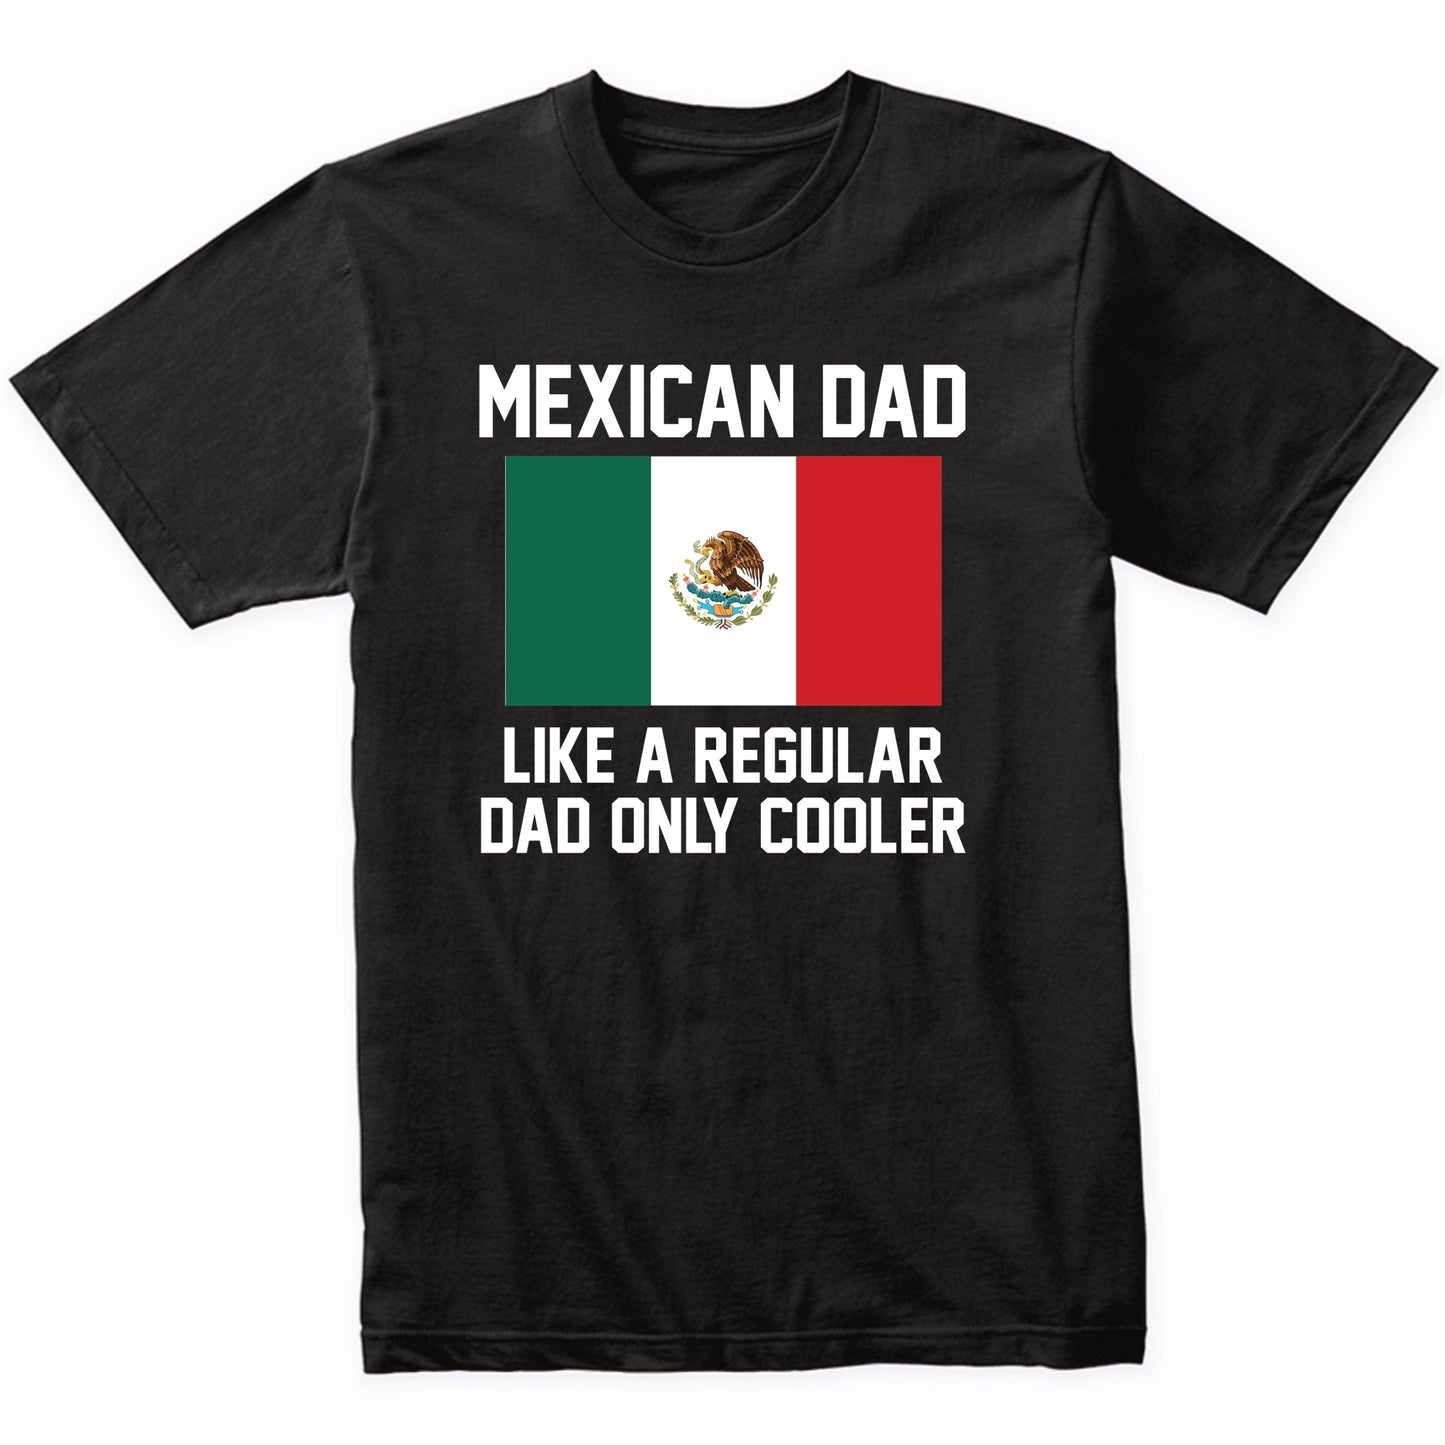 Mexican Dad Like A Regular Dad Only Cooler Shirt